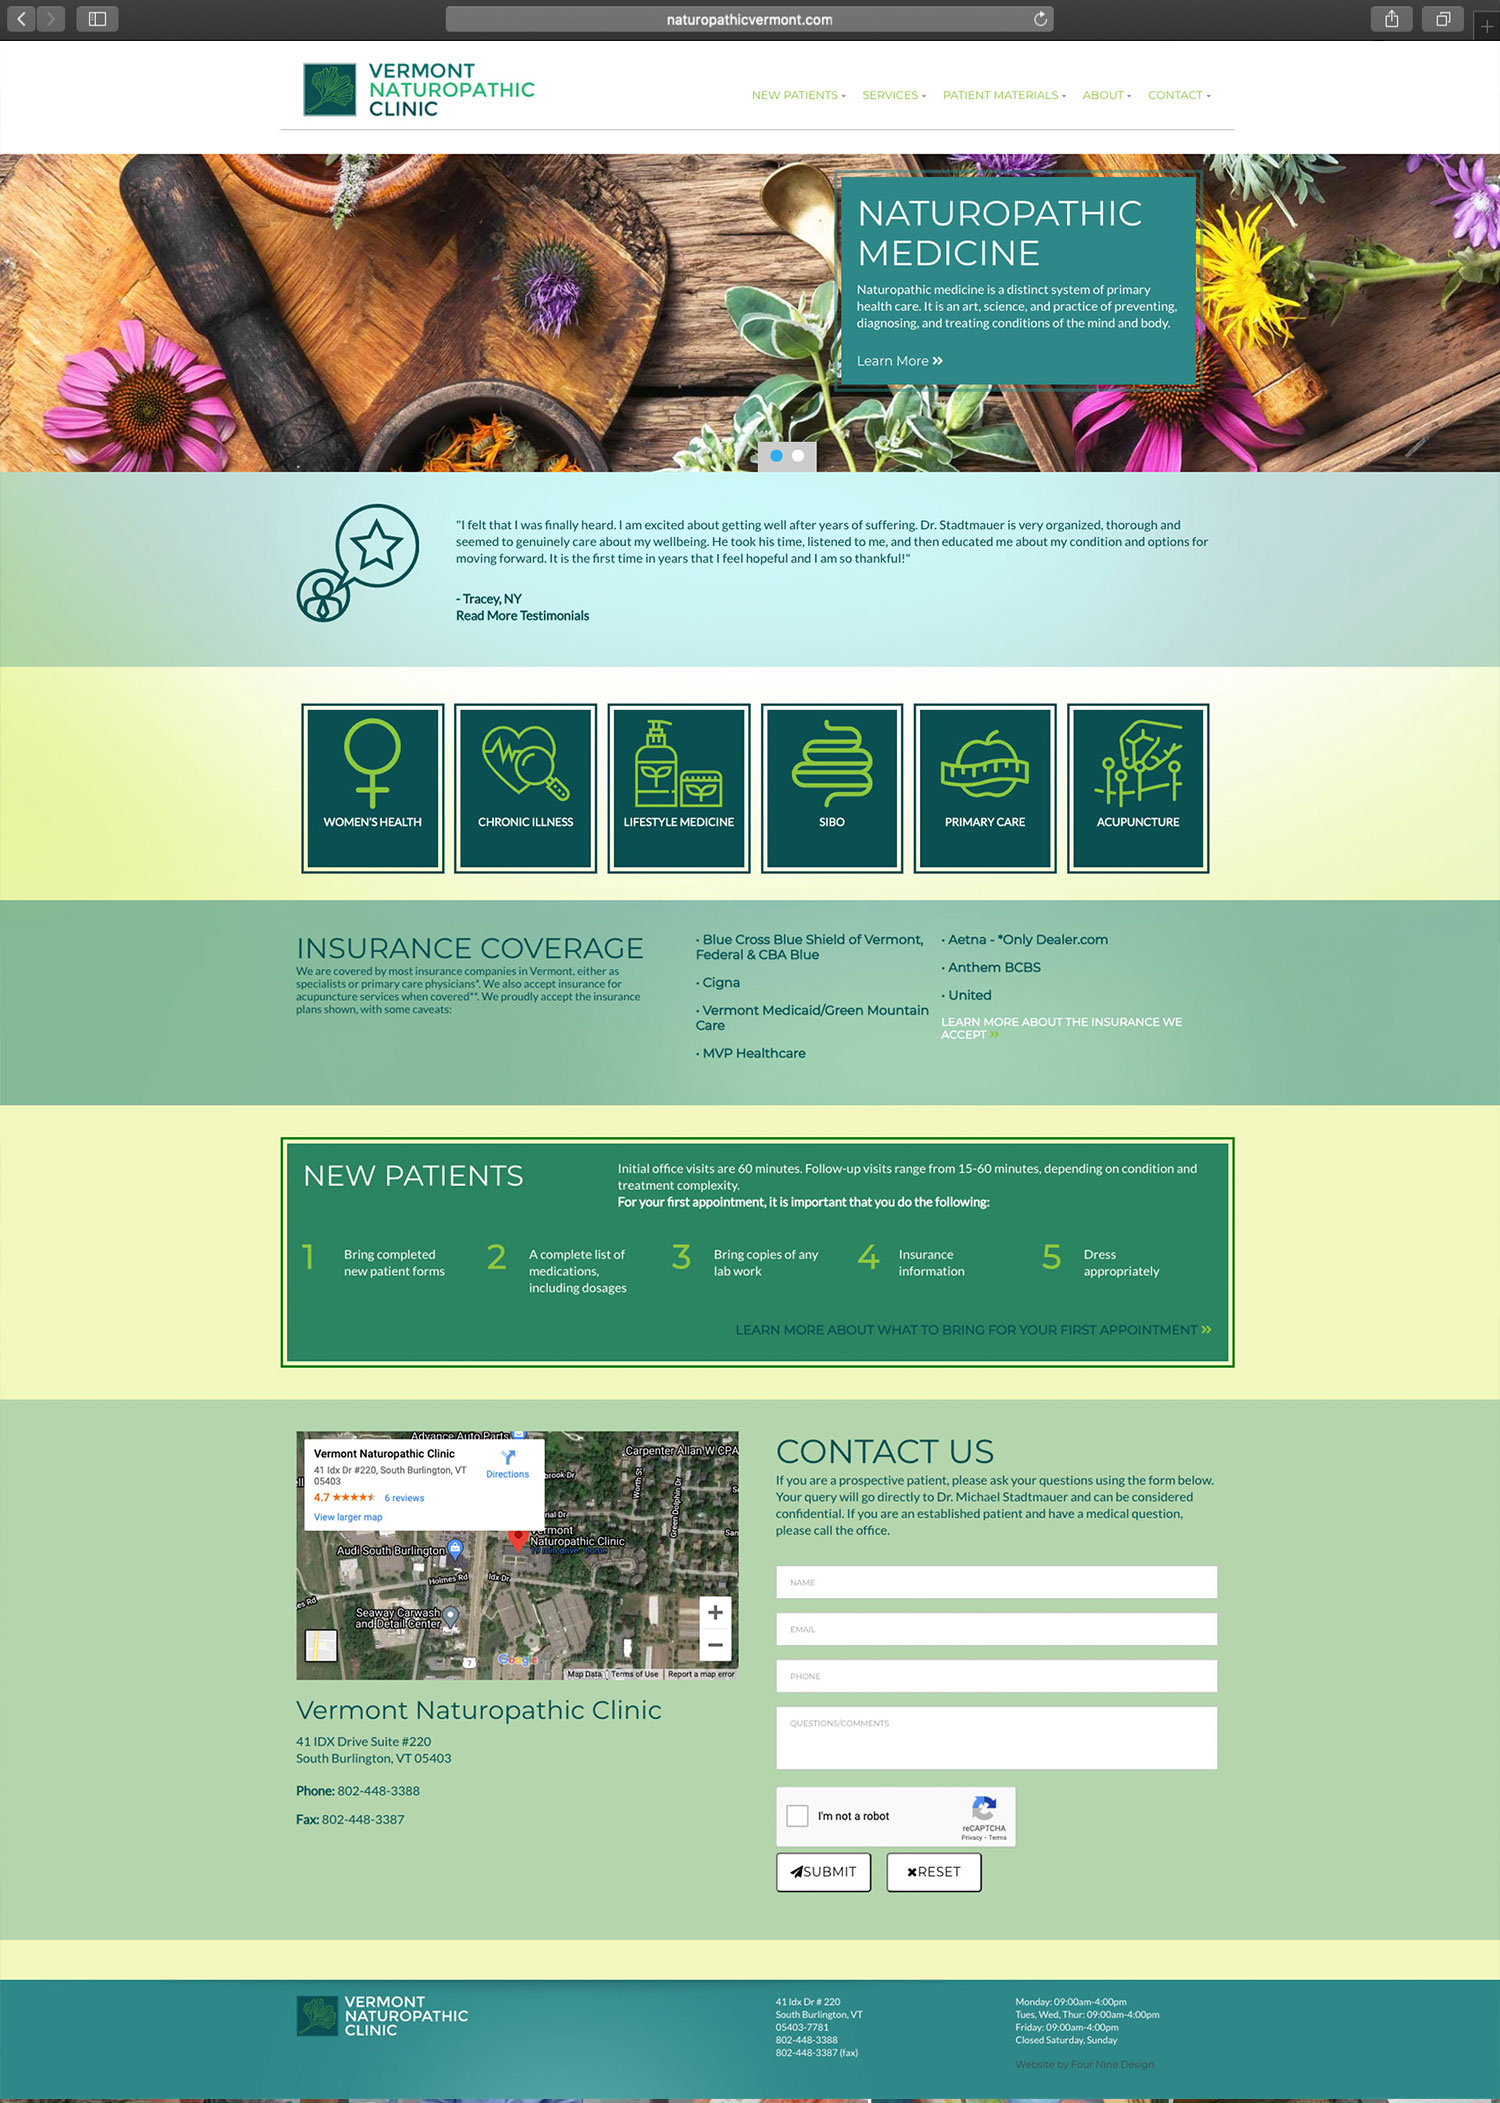 Website design and website development for Vermont Naturopathic Clinic - homepage view.